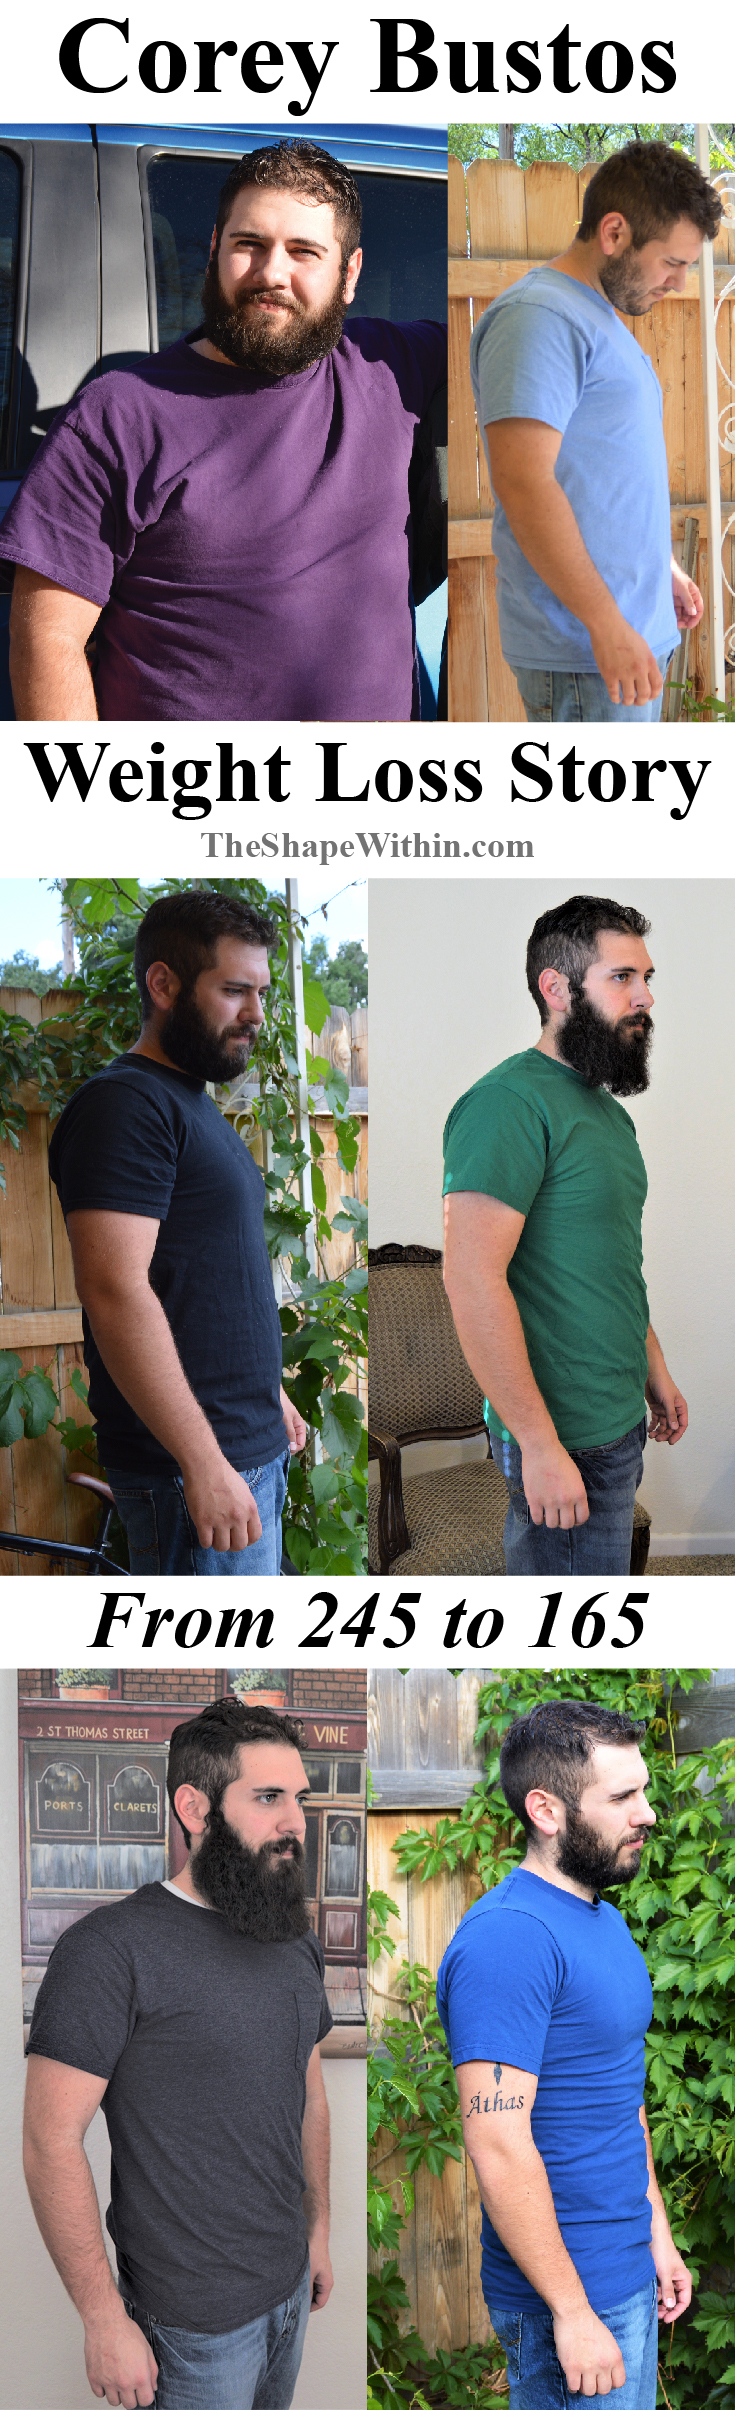 An inspiring weight loss story filled with lots of motivating before and after weight loss photos. Learn how Corey Bustos lost 80 pounds, and see his amazing transformation! | TheShapeWithin.com